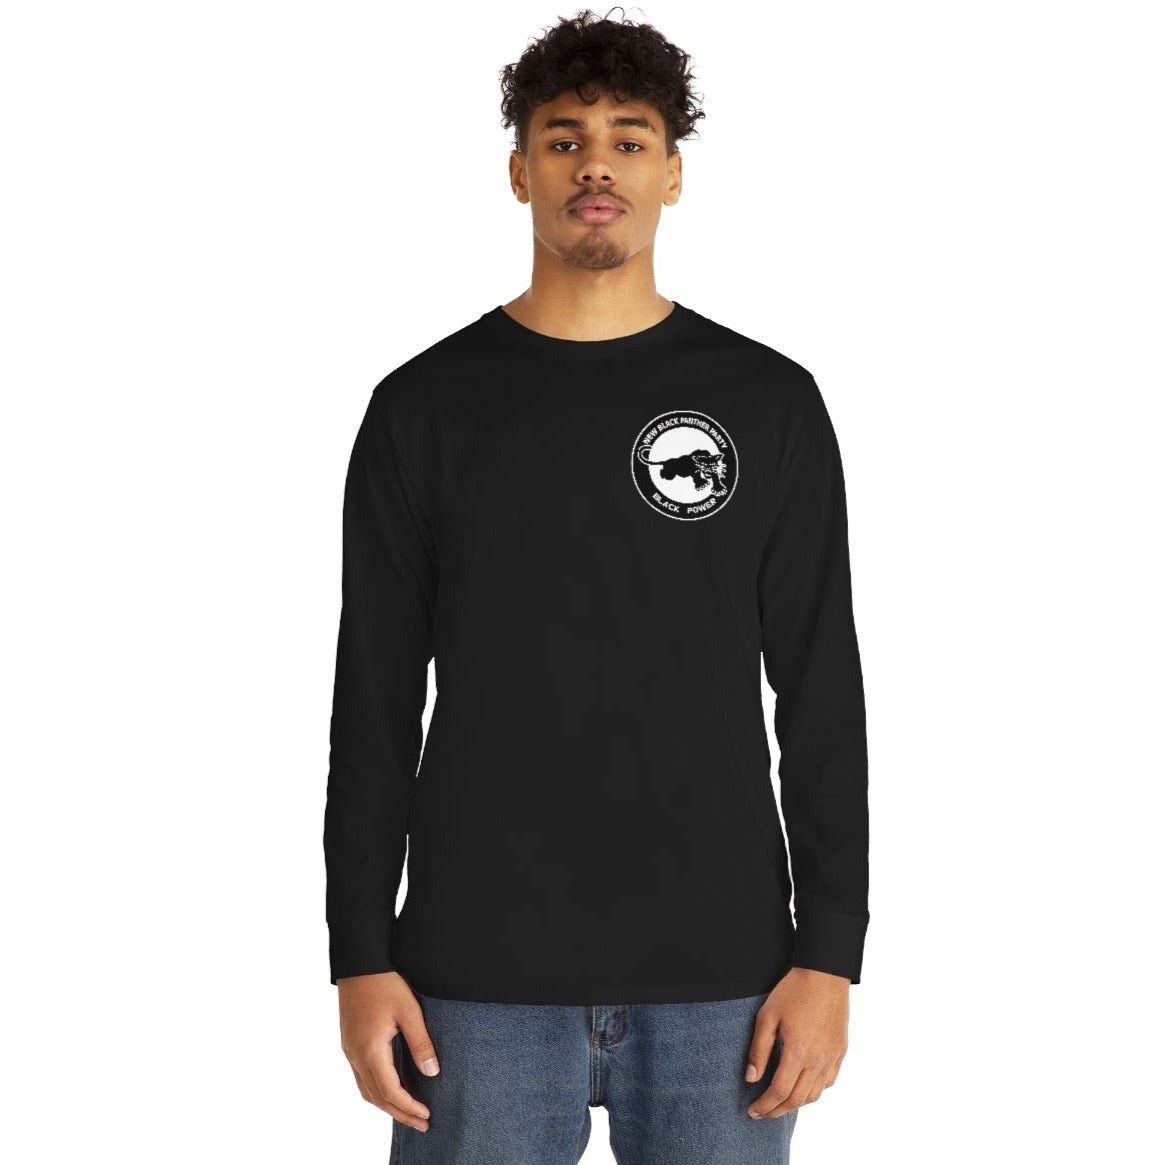 NBPP Long Sleeve Black Tee With Logo on Chest